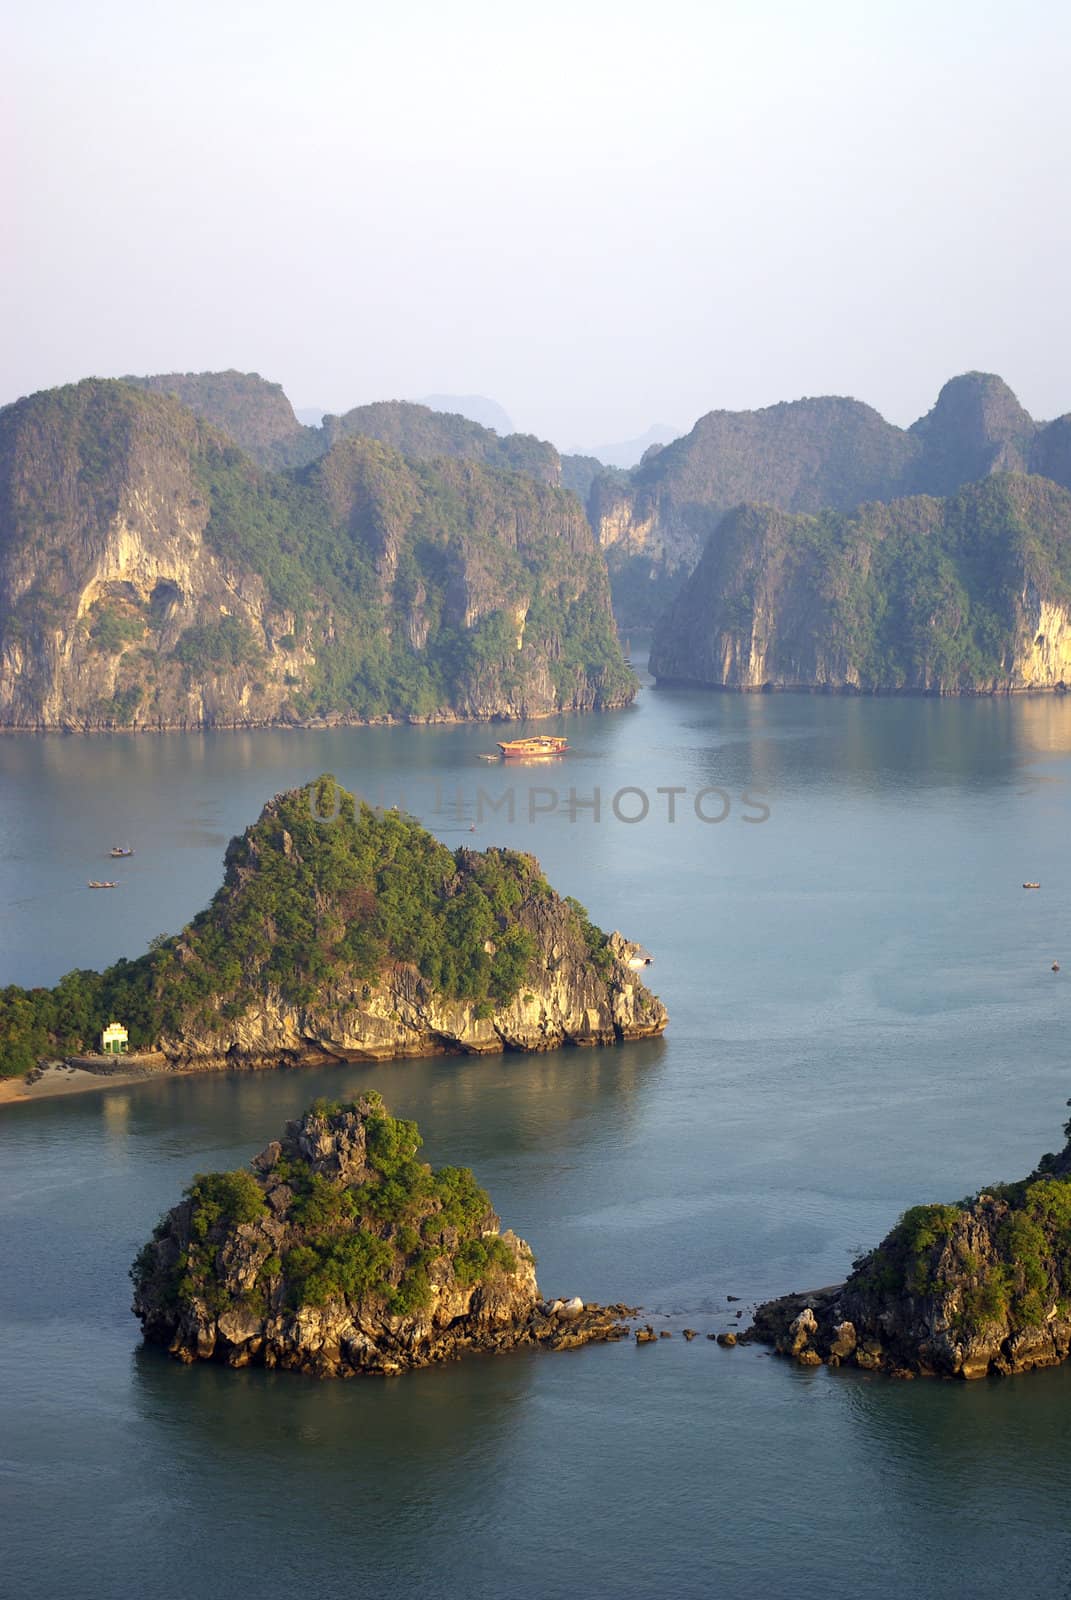 This is a beautiful view of Halong bay in Vietnam at the end of afternoon